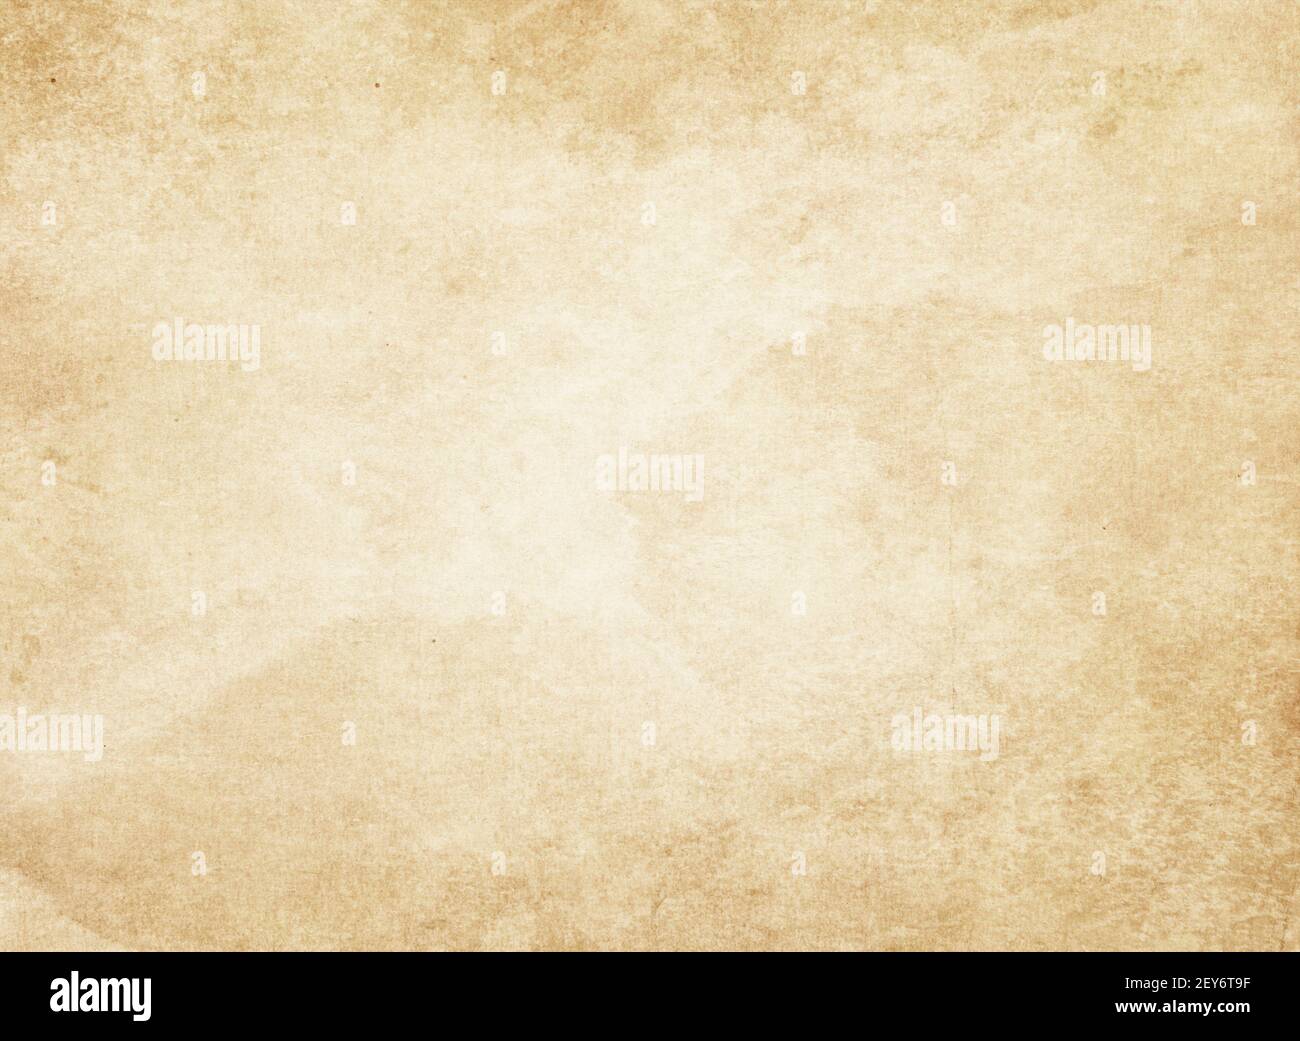 Bad condition paper texture for background. Stock Photo